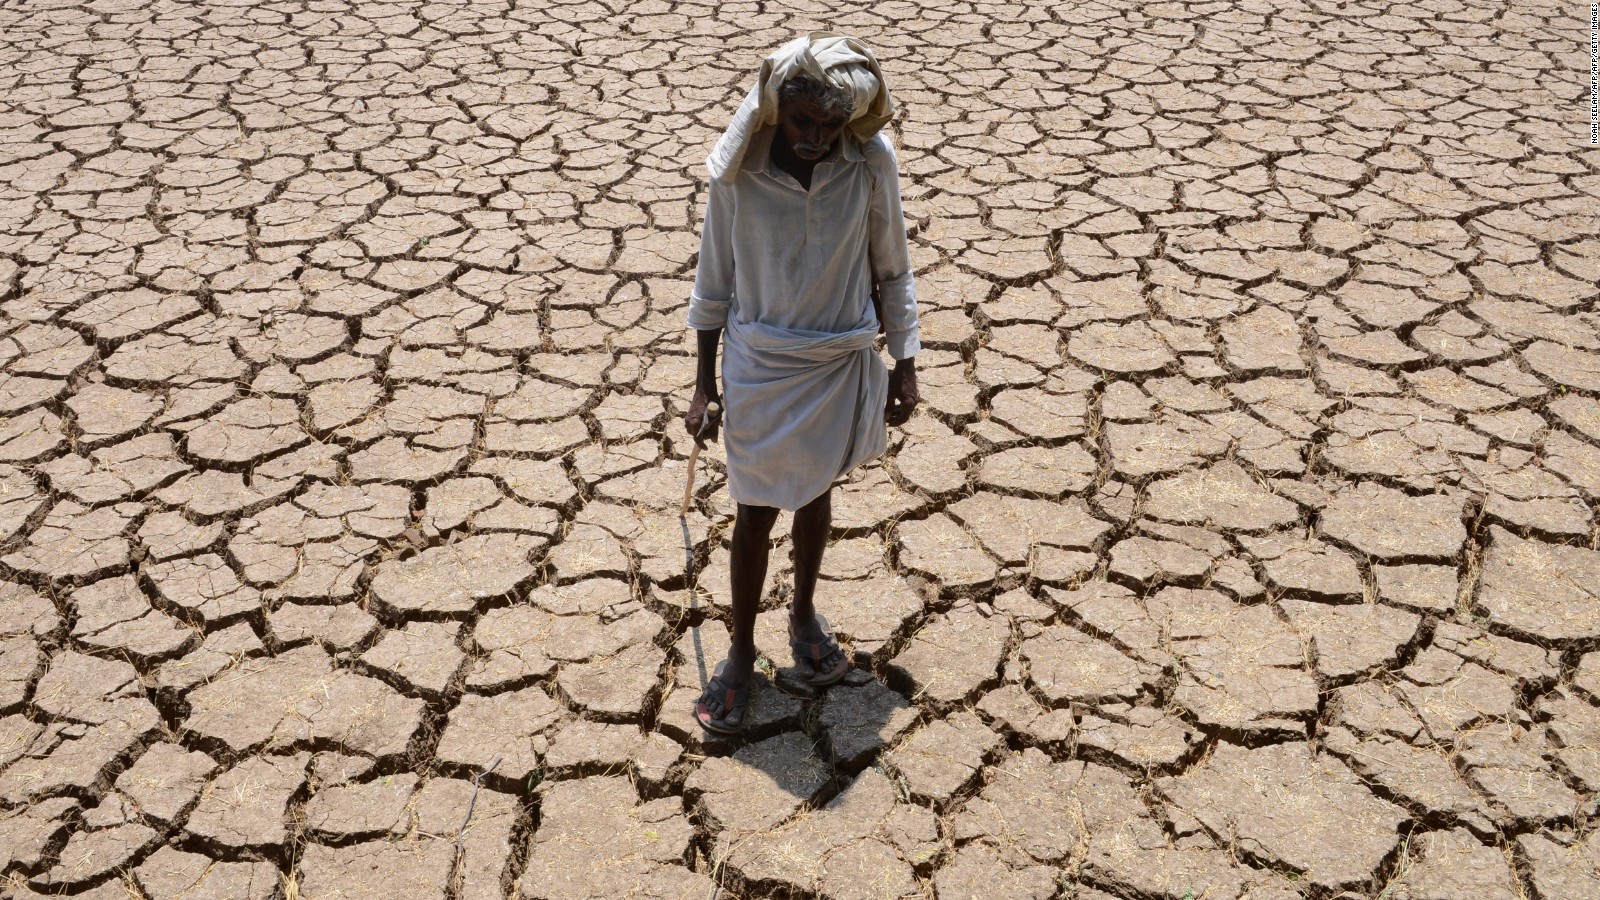 160505102910-gettyimages-524092582india-drought-full-169